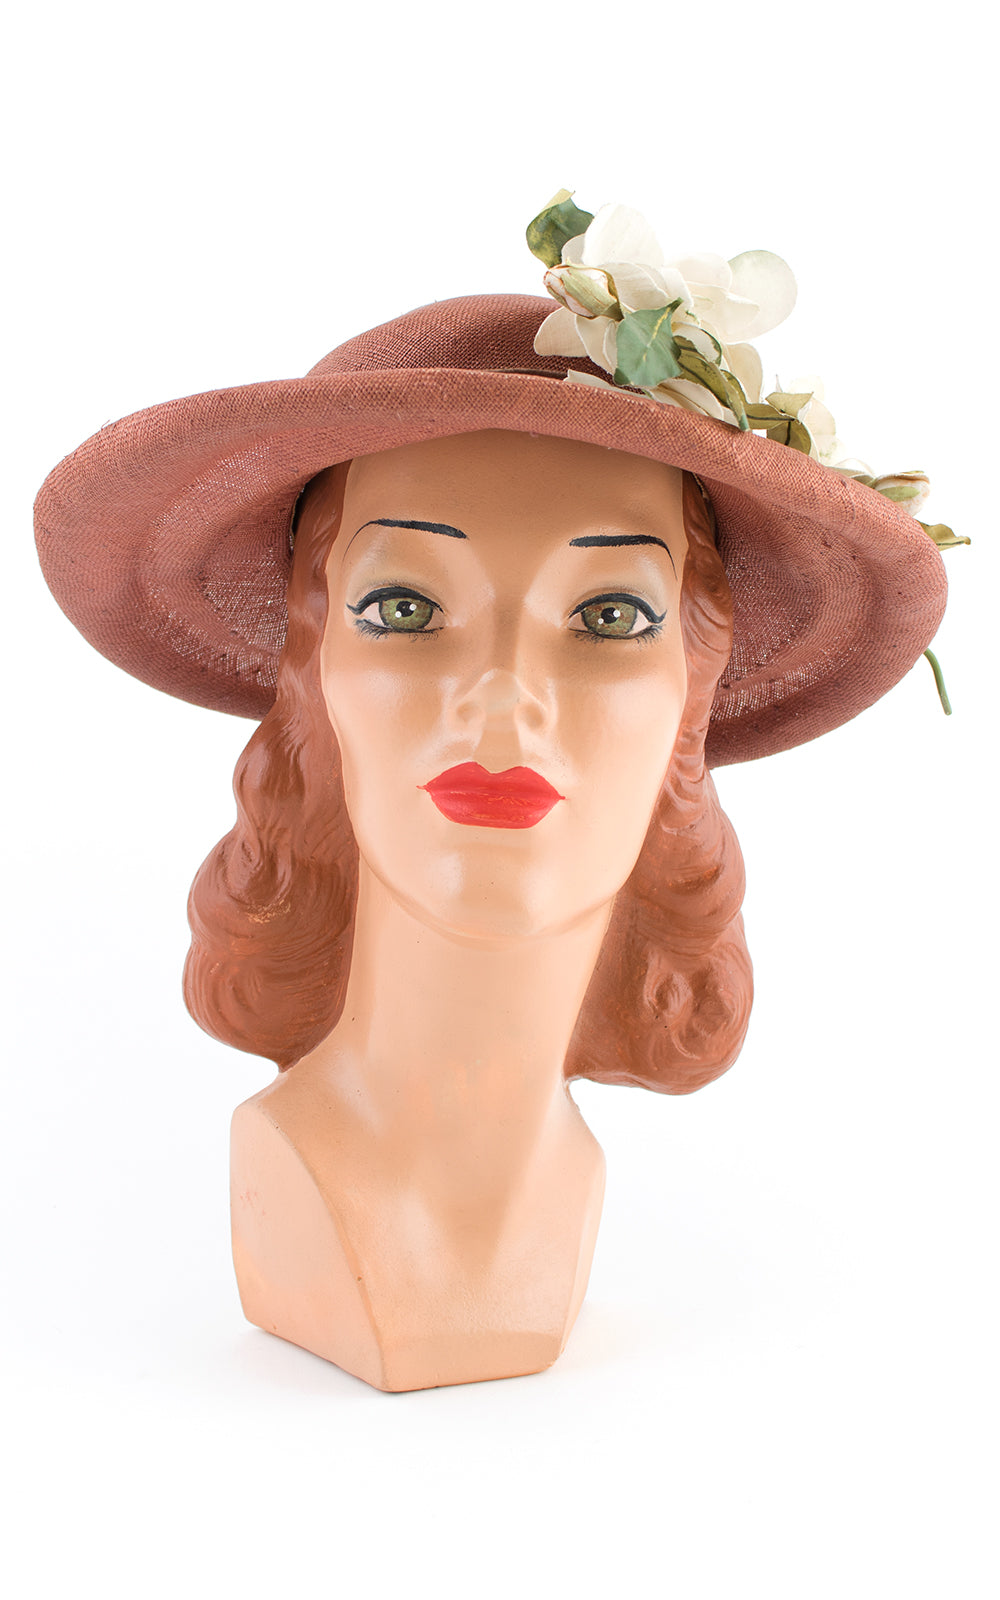 1950s White Floral & Brown Woven Sun Hat